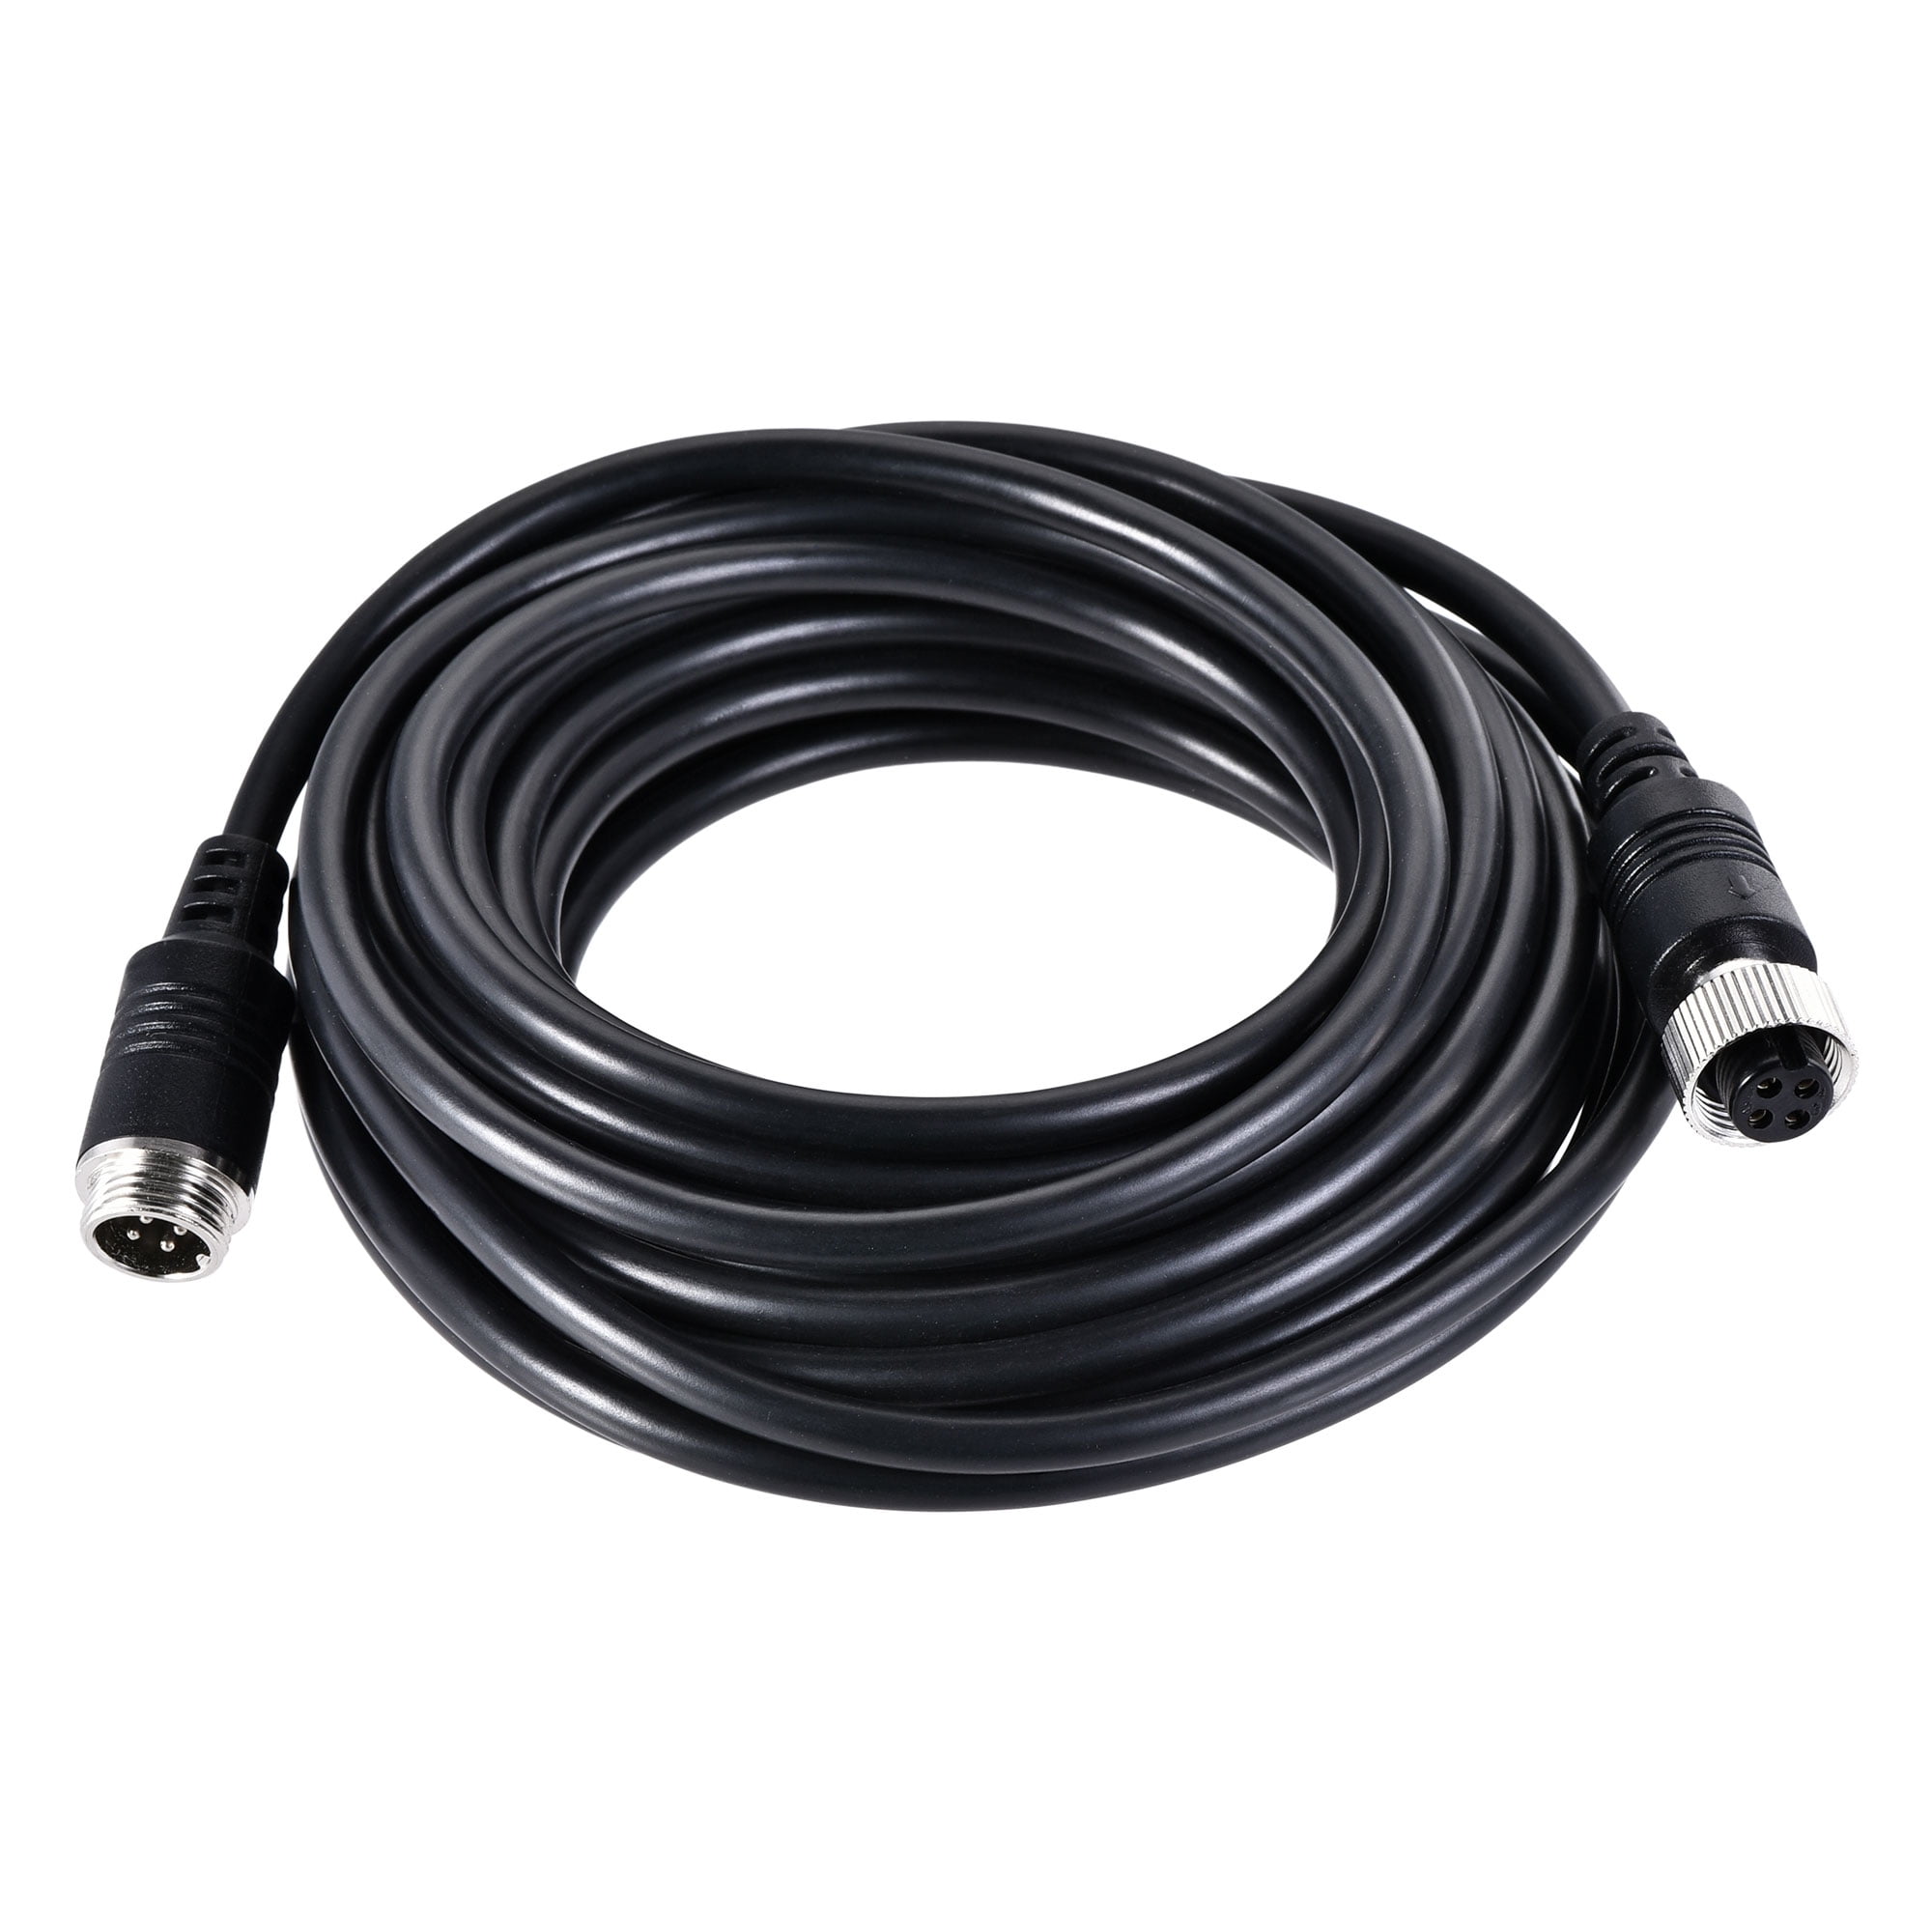 uxcell Video Aviation Cable 4-Pin 6.56FT 2M Male to Female Extension Cable 